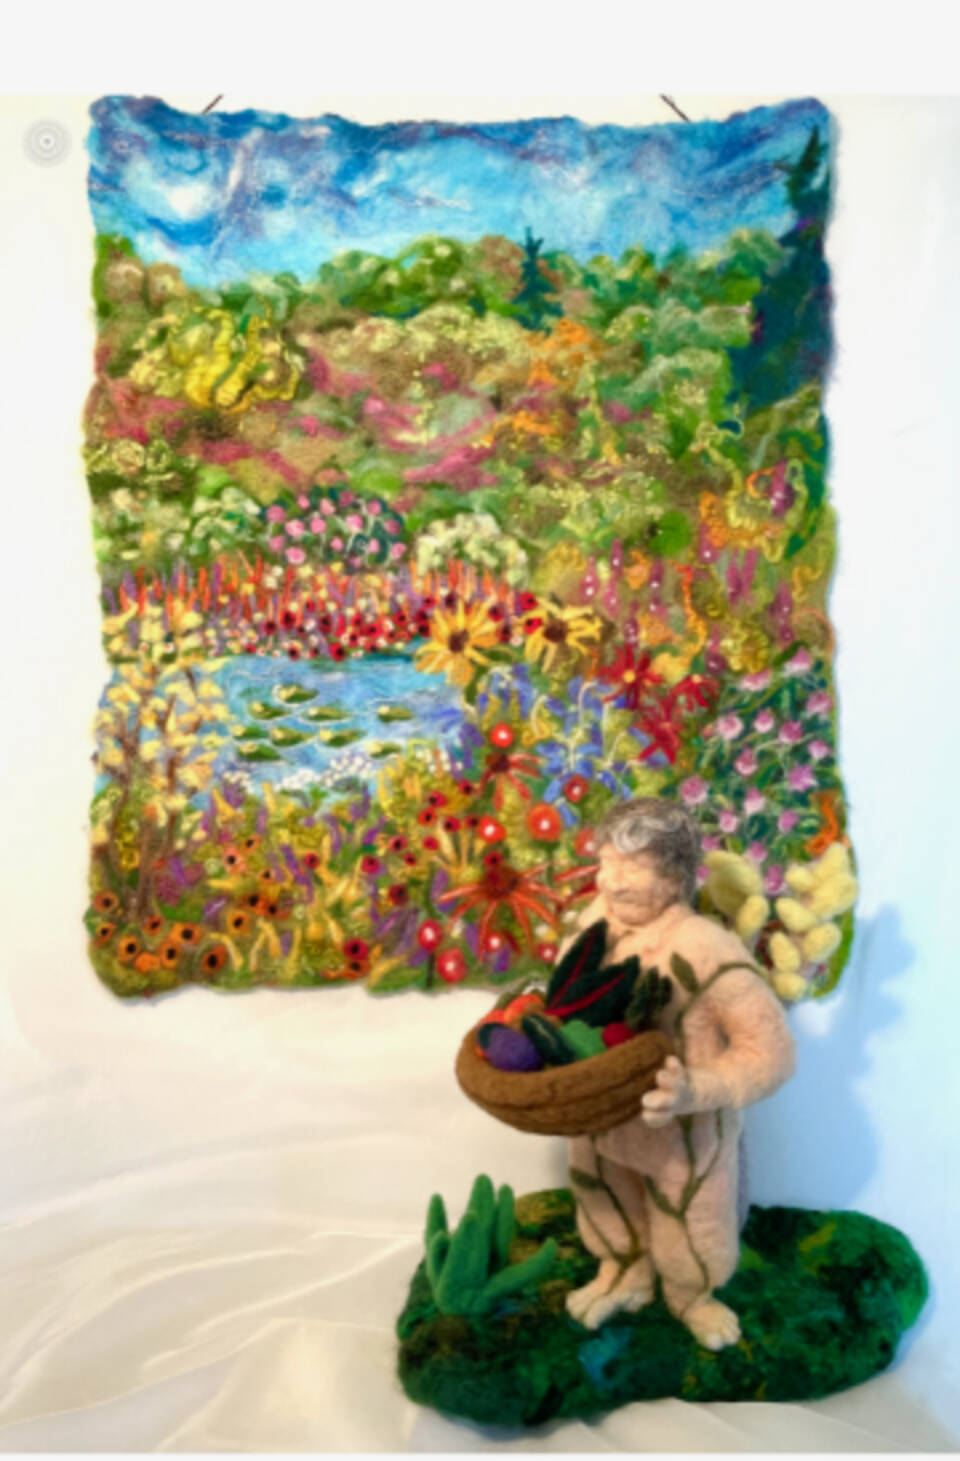 “Marion’s Garden,” a wool painting by Nancy Wise is on display through July alongside felted work by Susan Williams Polgar at the Art Shop Gallery in Homer, Alaska. Photo courtesy of Art Shop Gallery